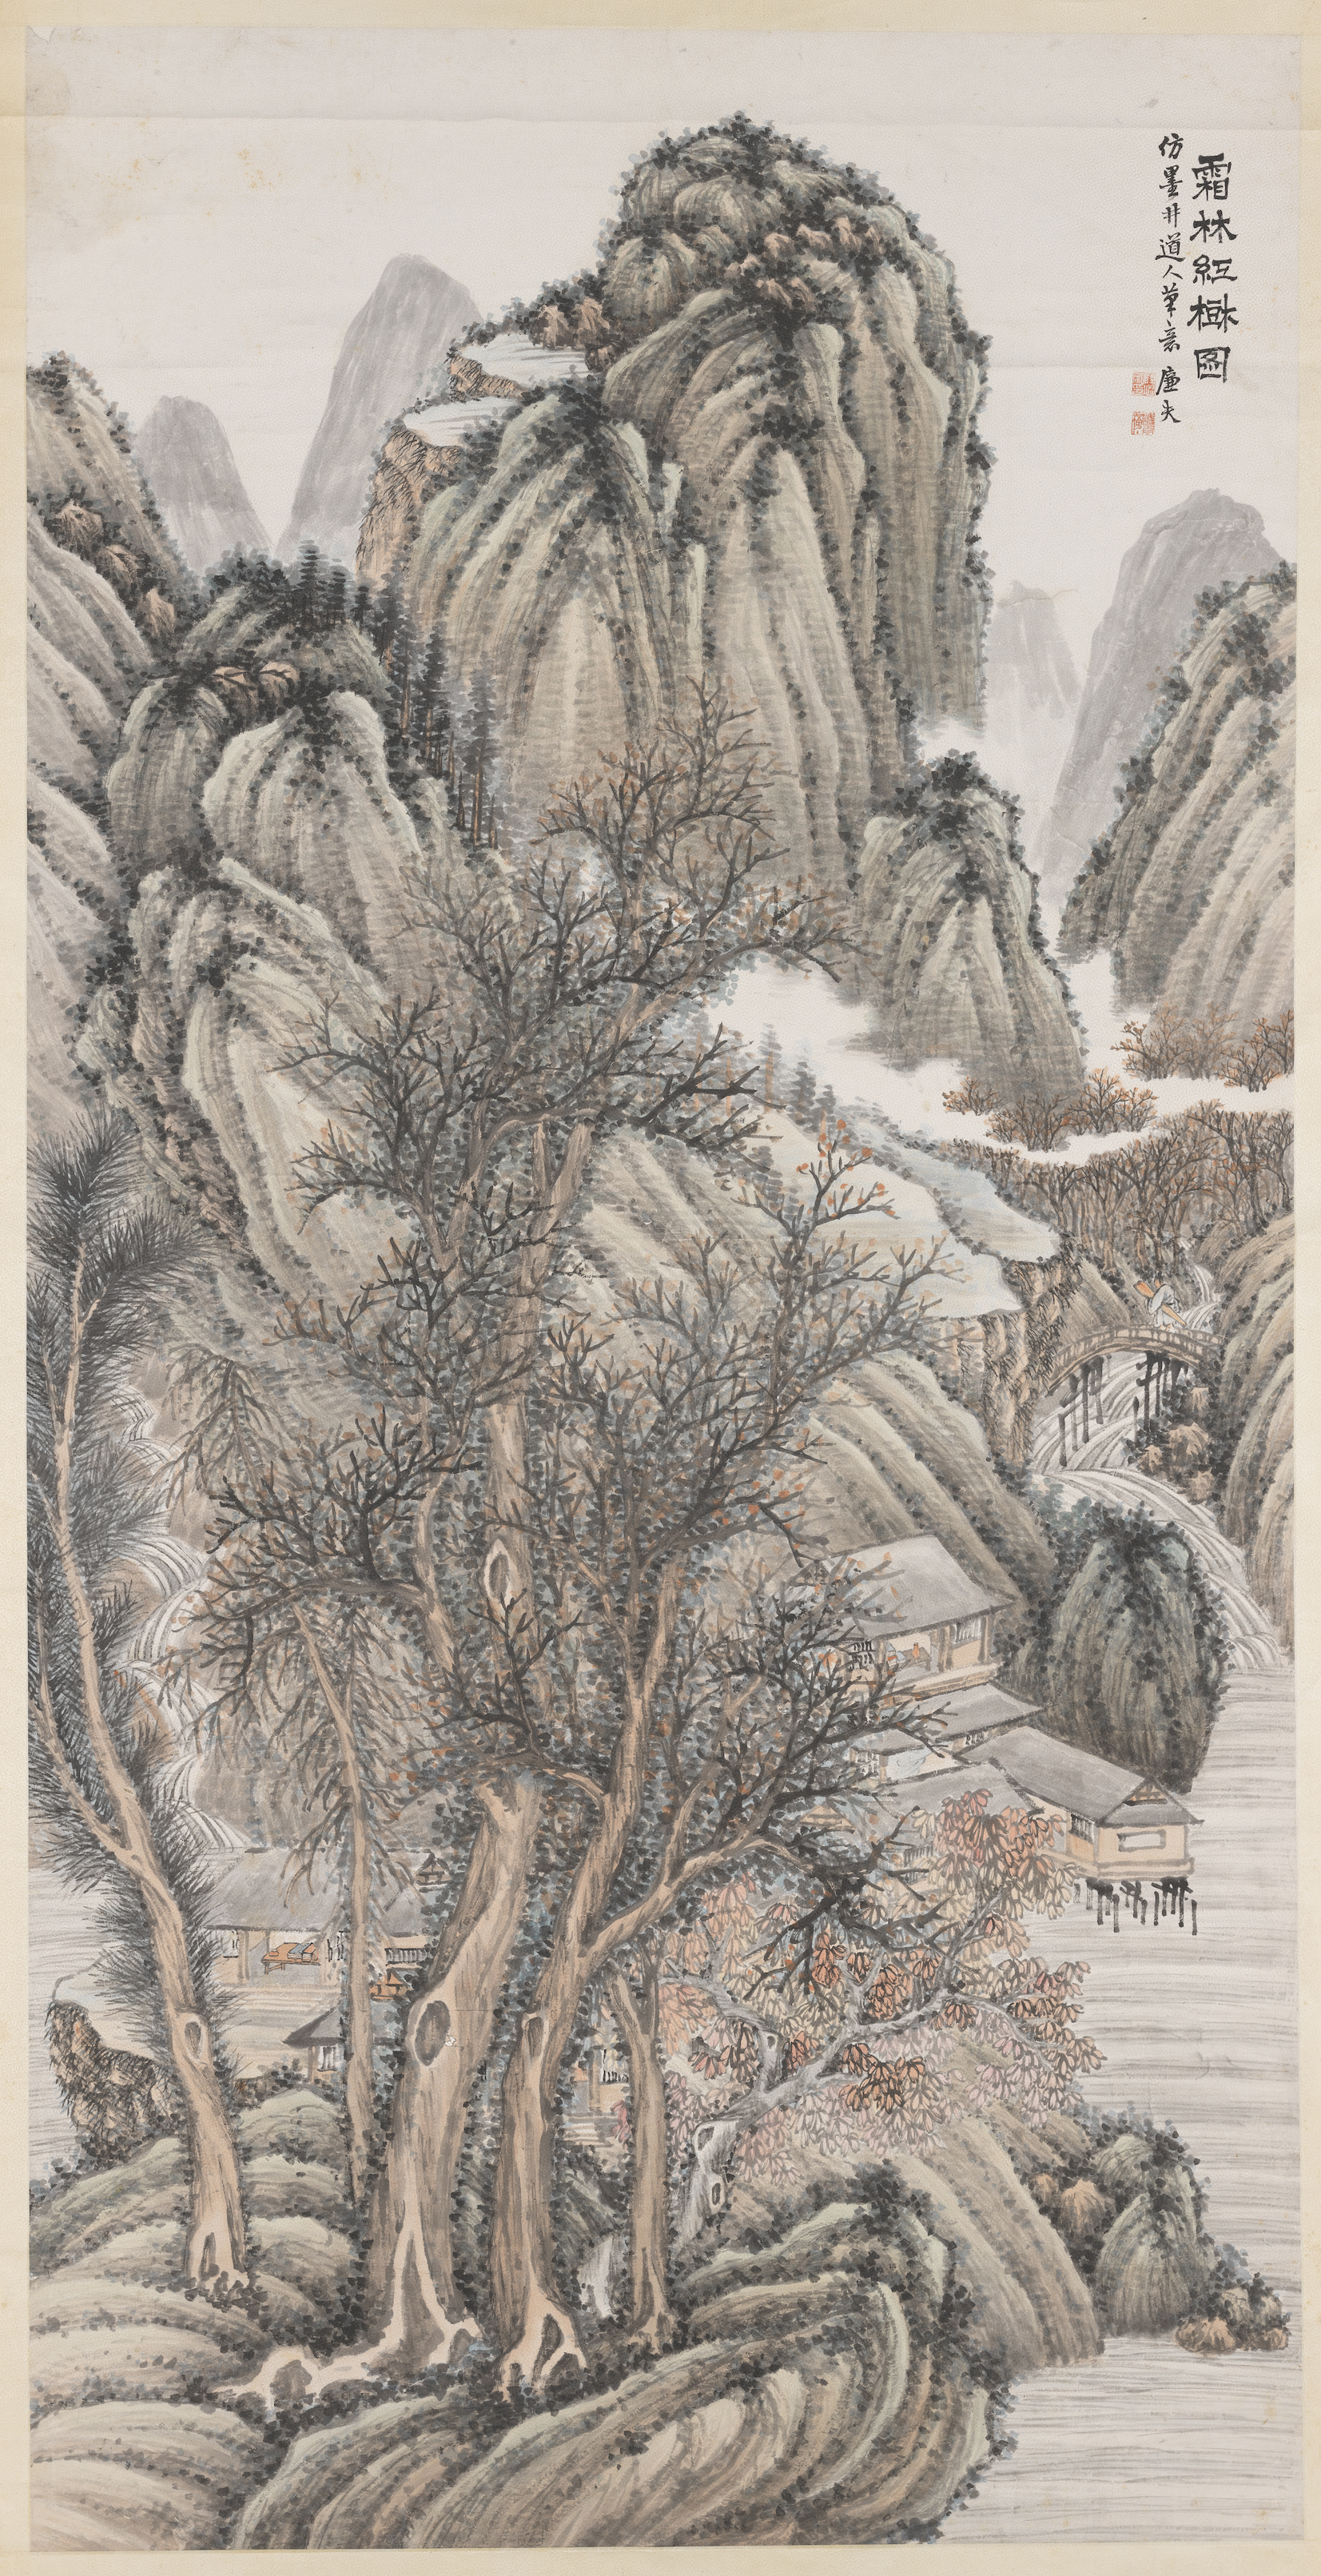 Red Trees and Frosty Forests, Lu Hui (1851-1920), Republican period